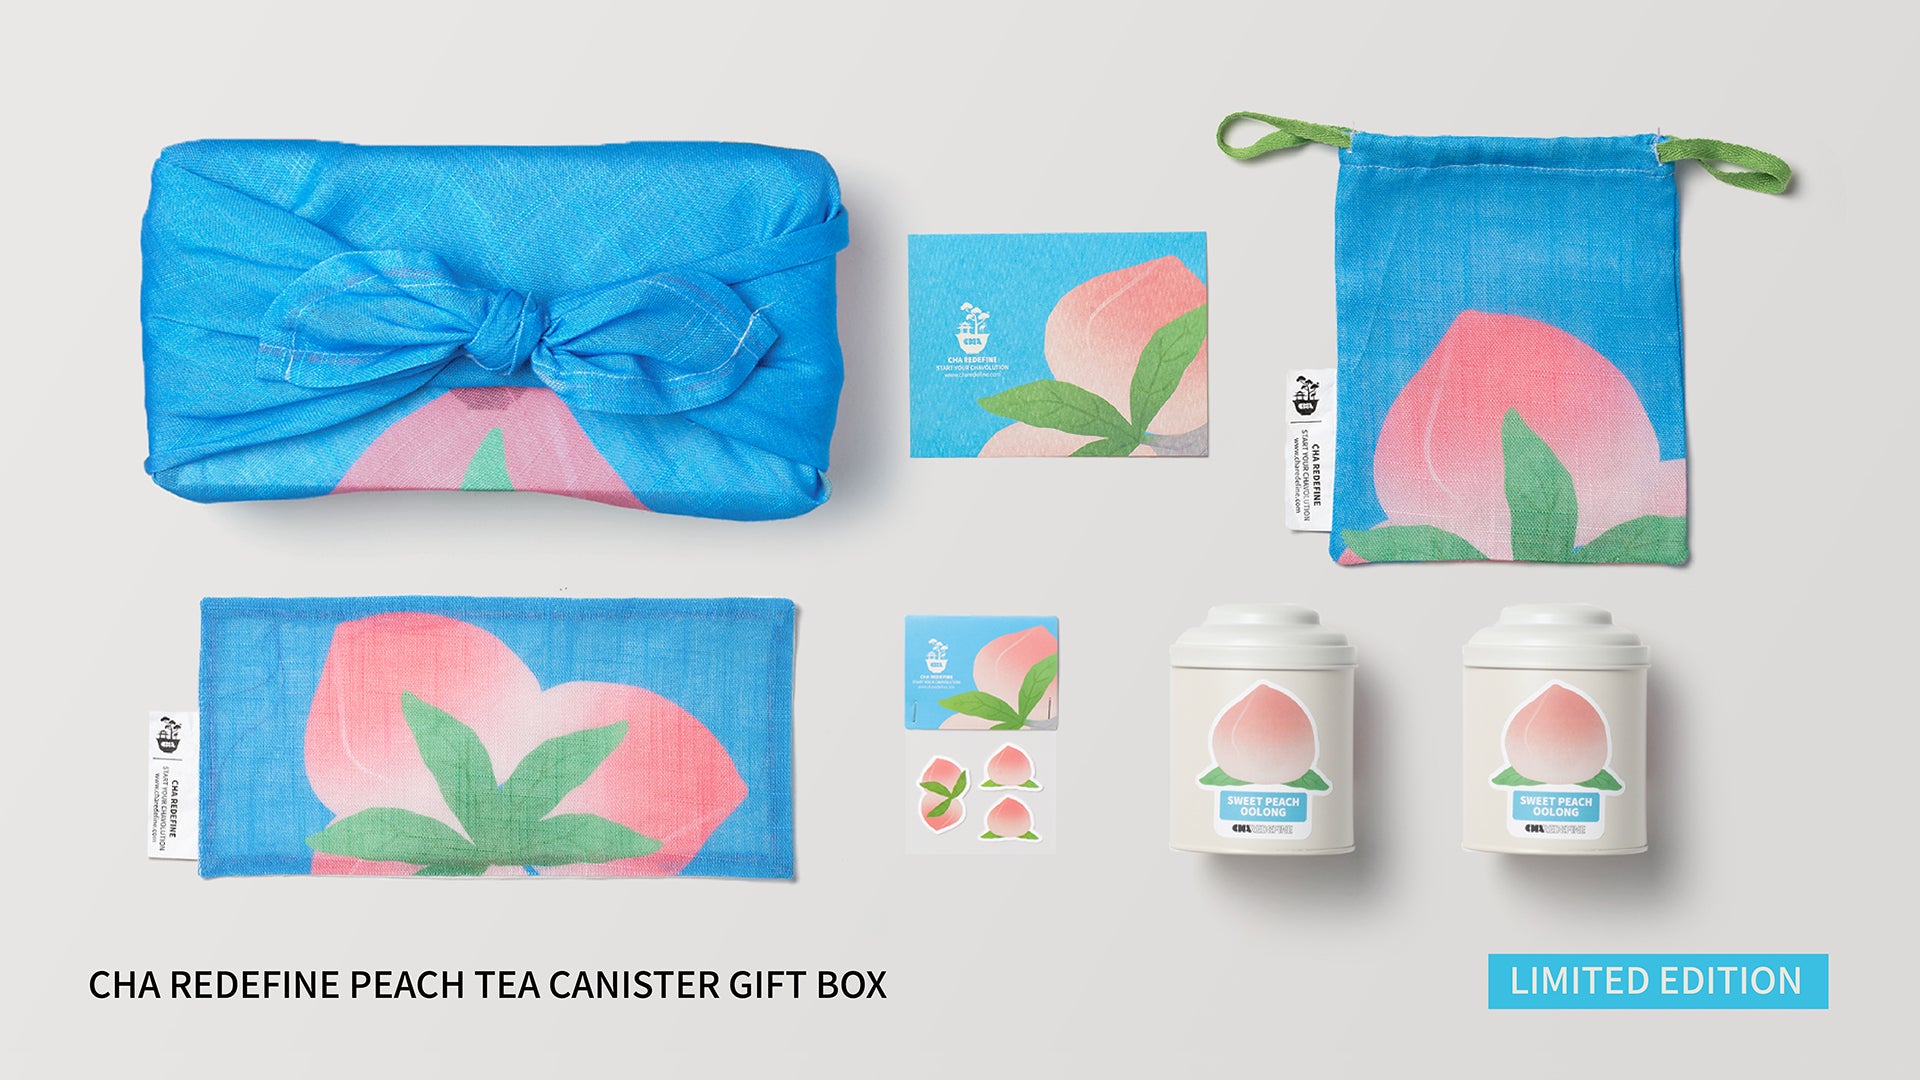 cha redefine peach tea canister gift box limited edition 